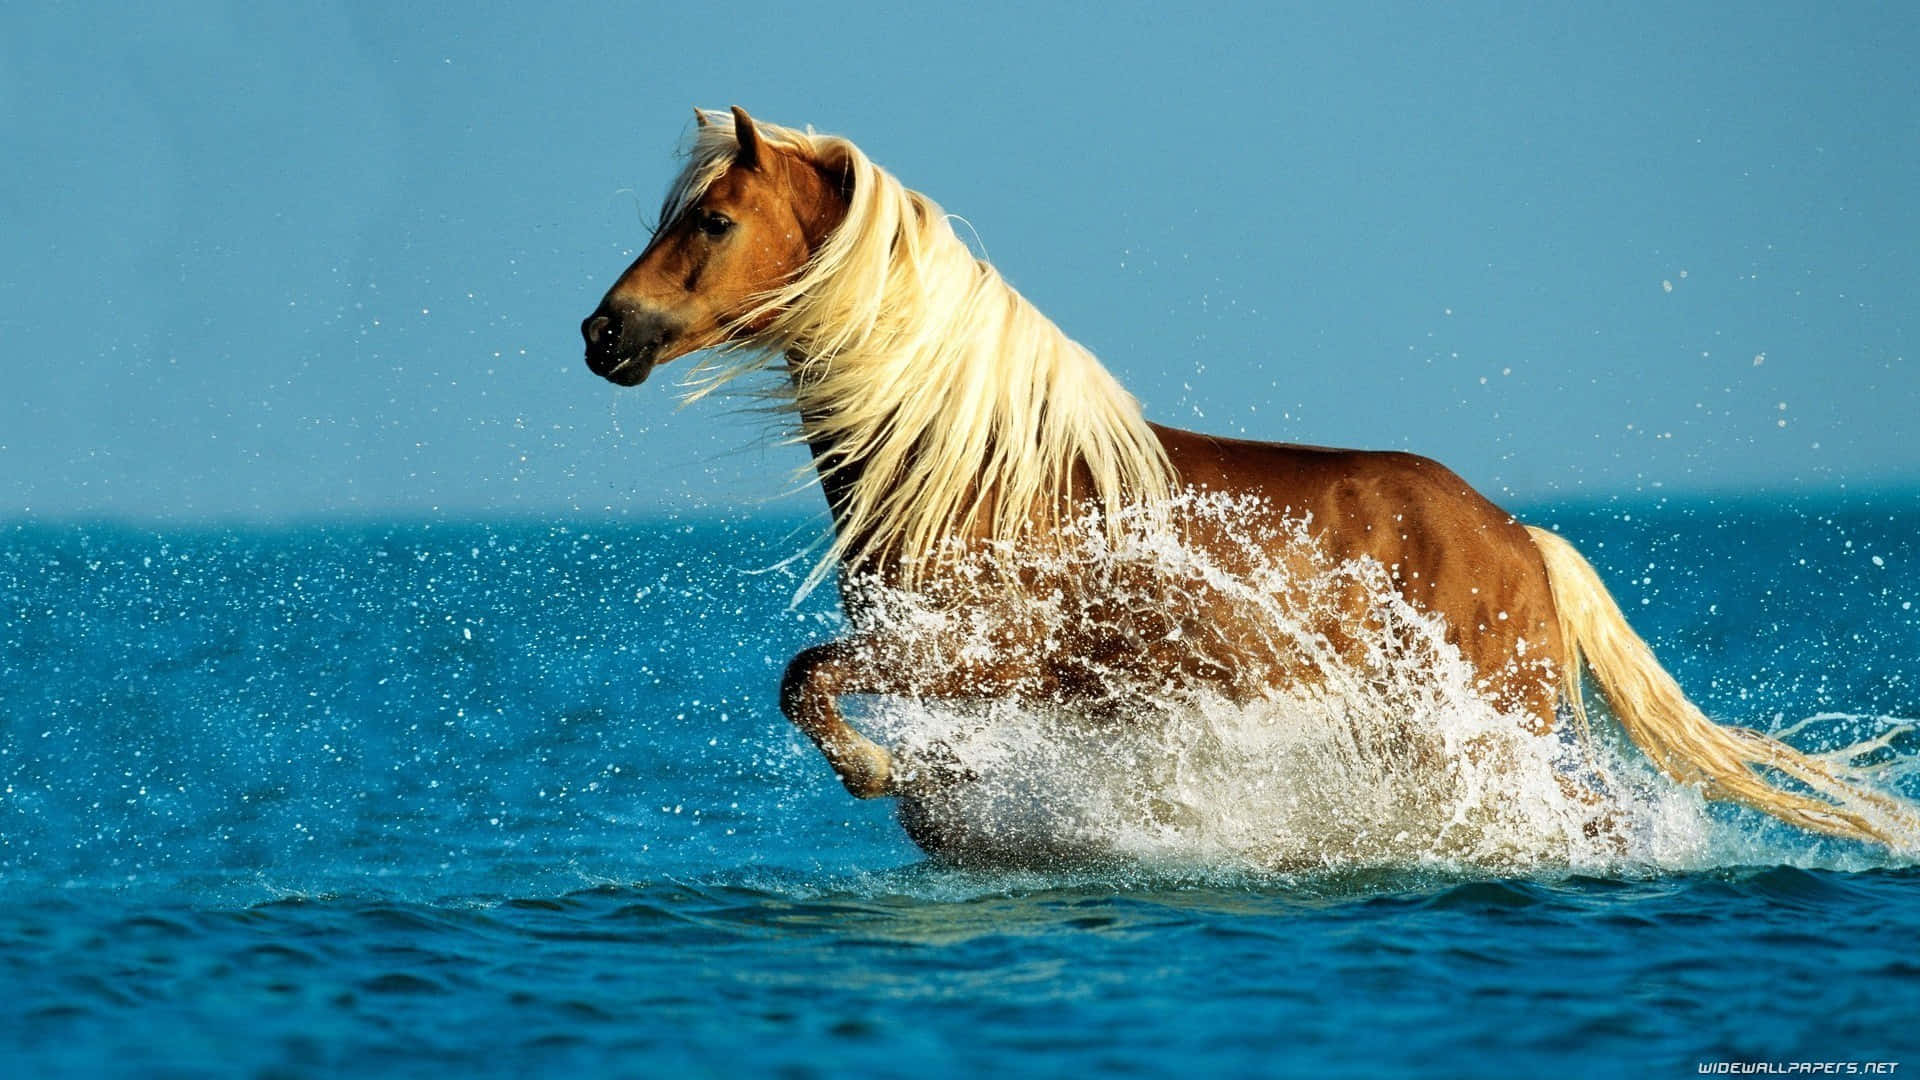 A Horse Running In The Water With A Long Mane